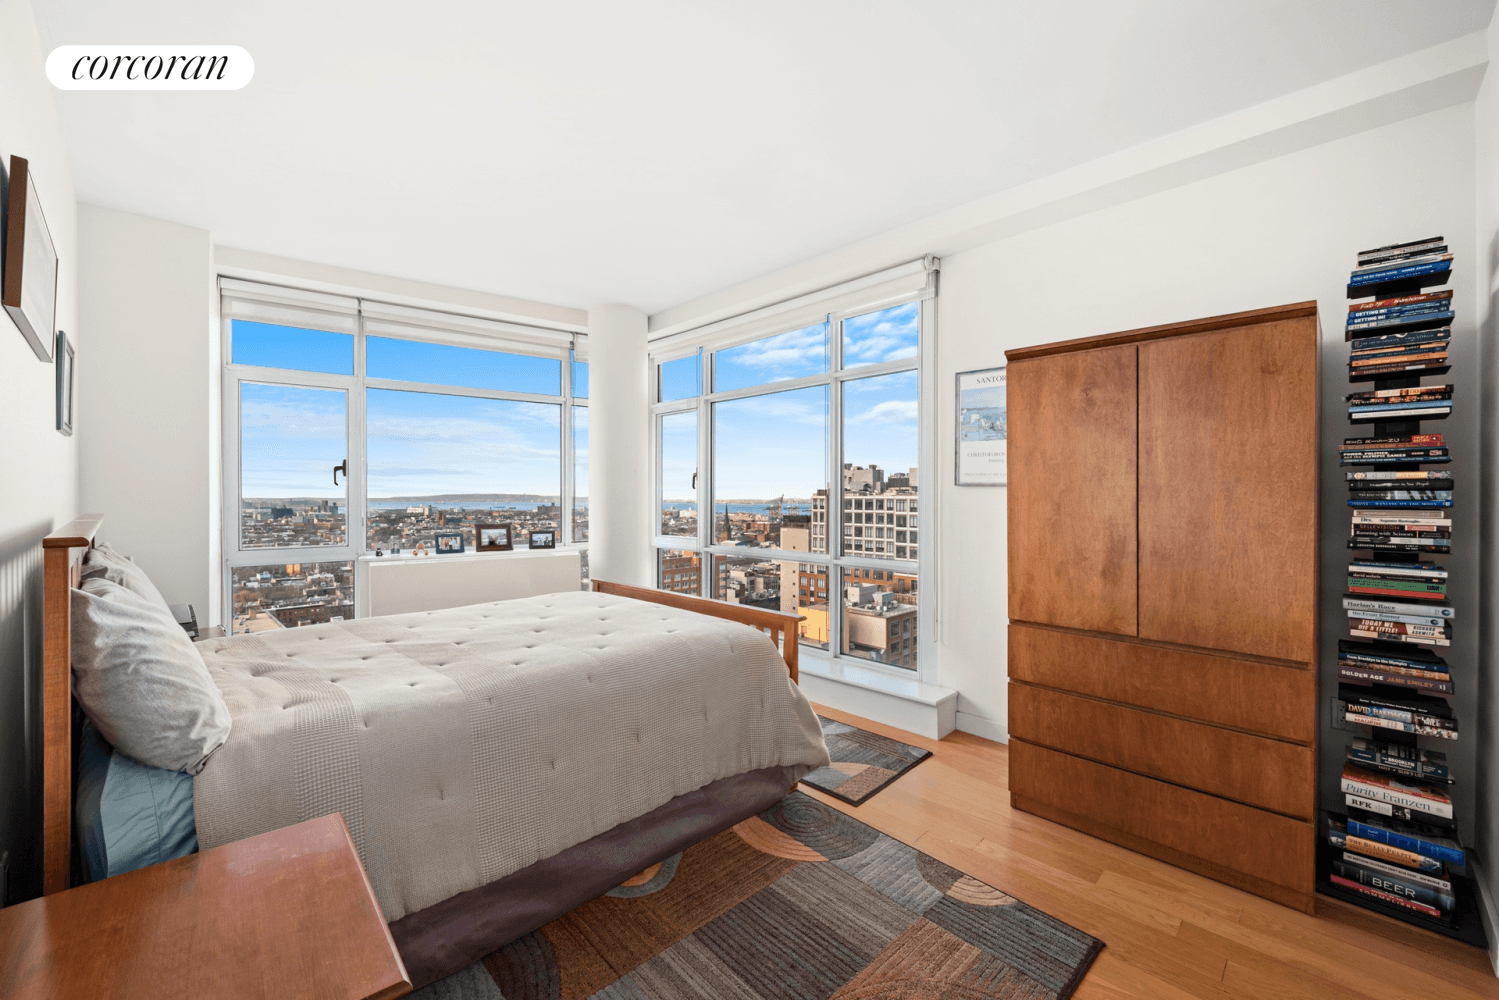 Not to be missed ! This home features wide open Brooklyn views from the 22nd floor through floor to ceiling windows.